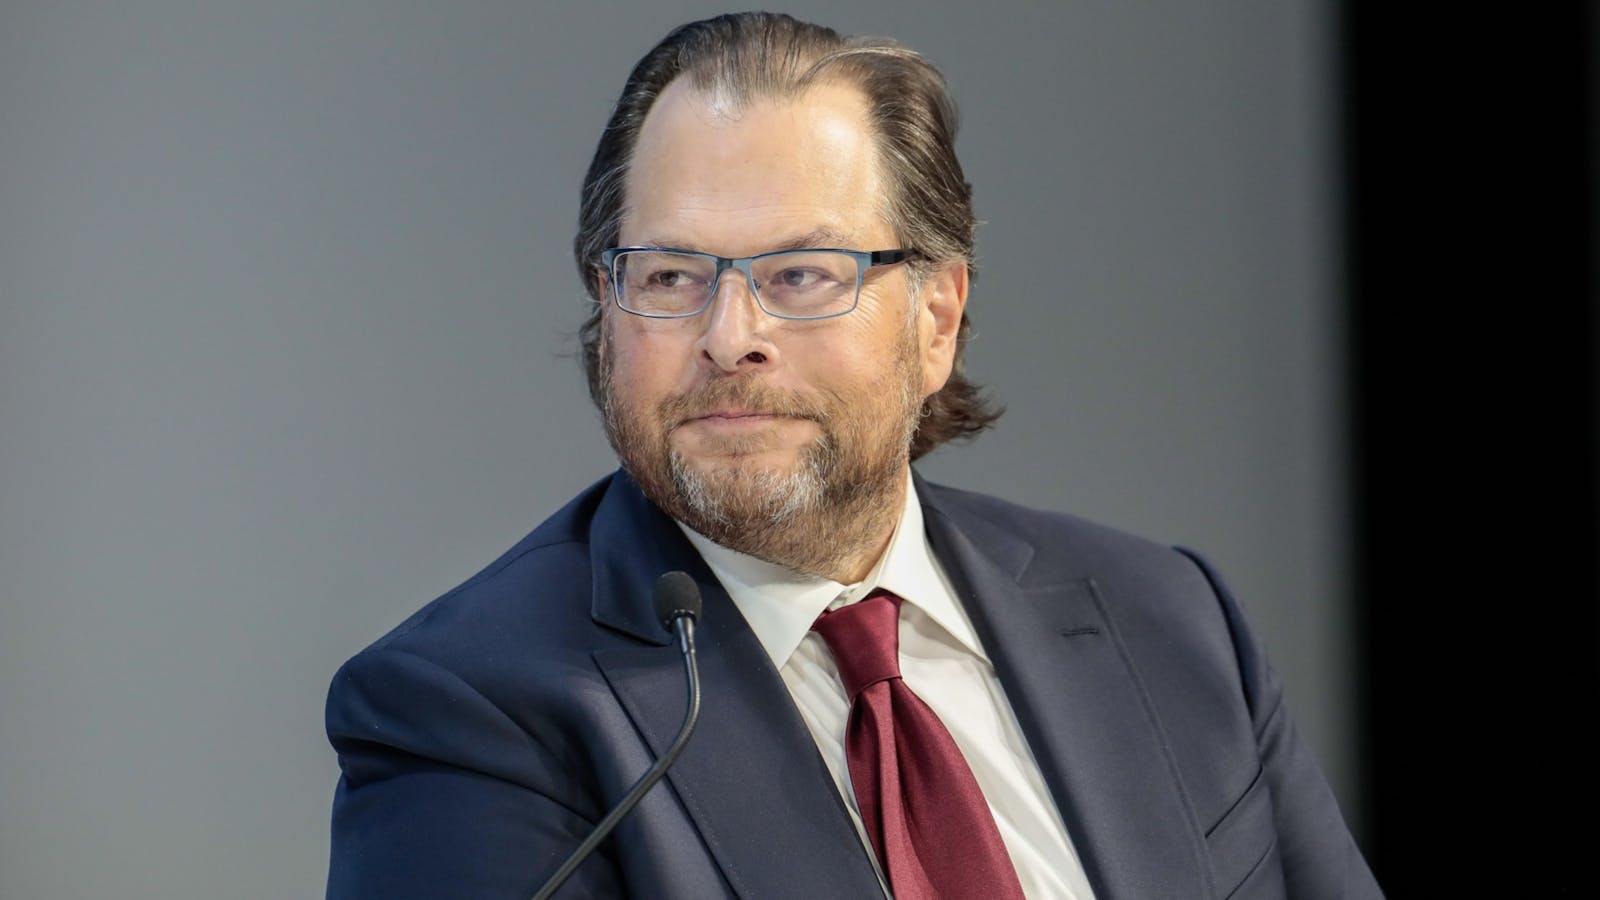 Salesforce co-CEO Marc Benioff. Photo by Bloomberg.